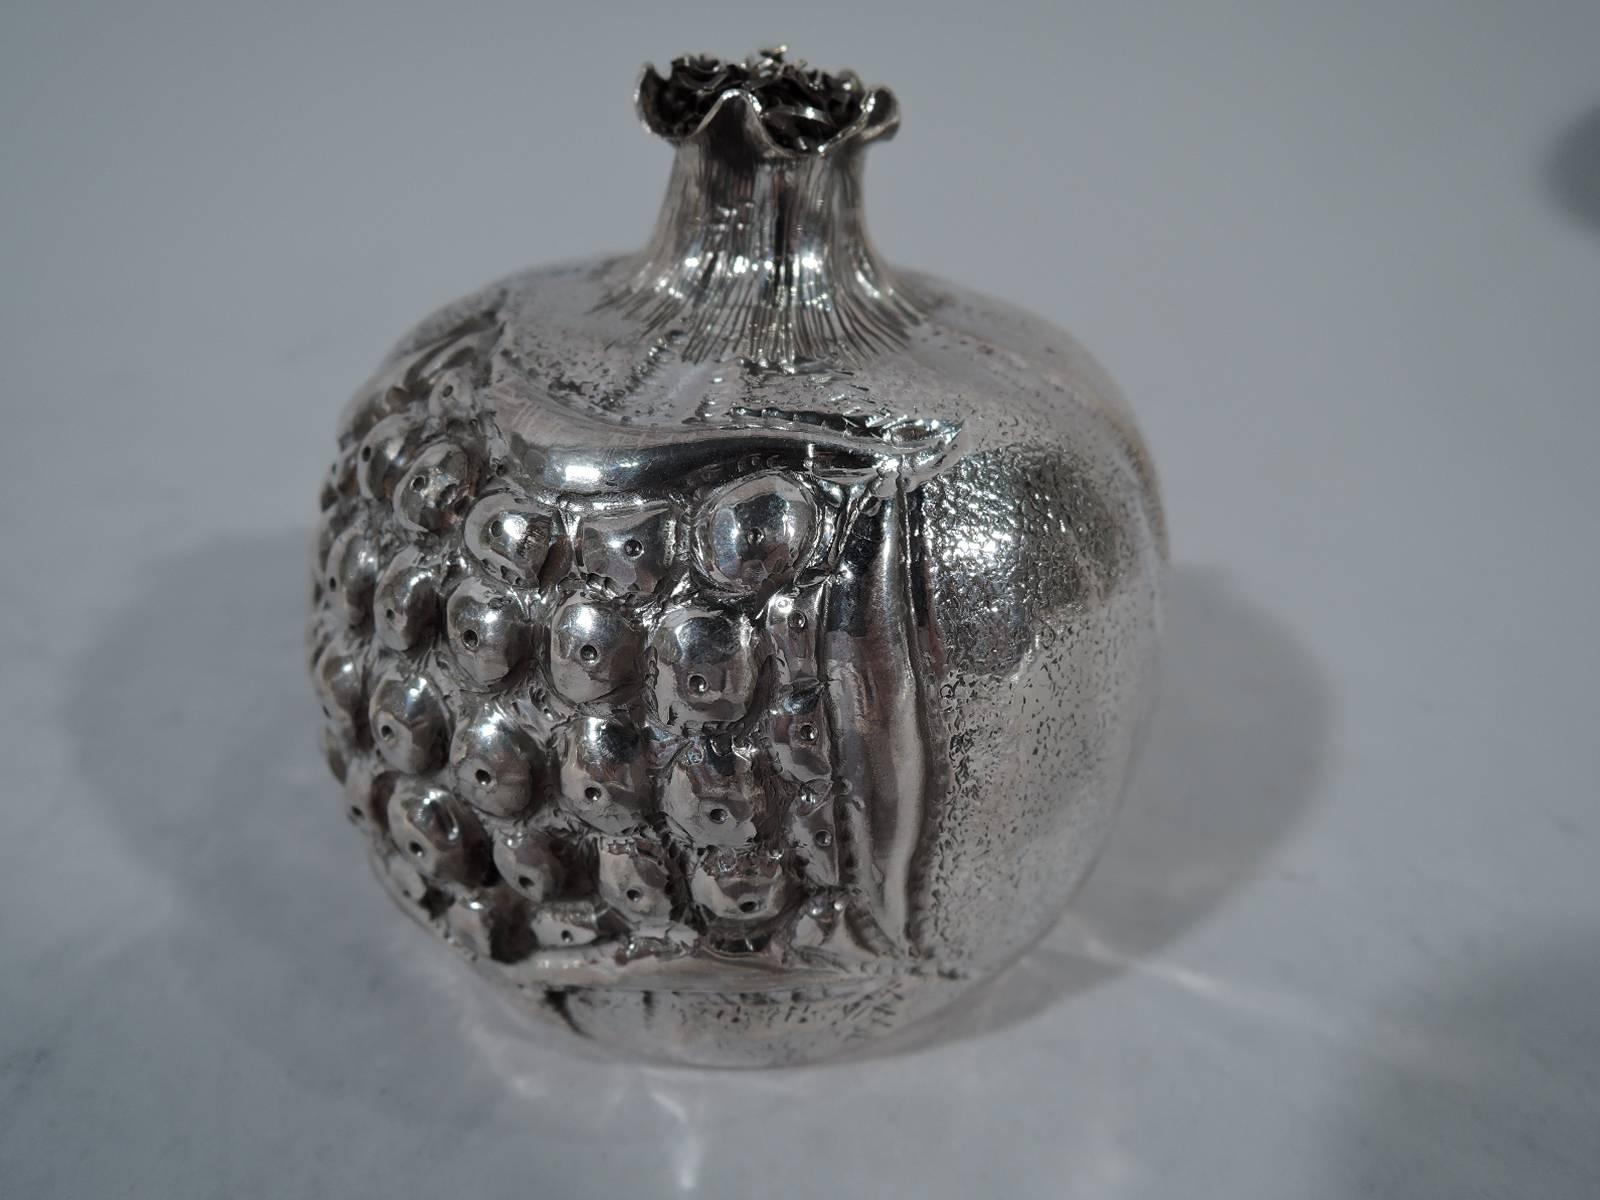 Italian 800 silver fruit-form lighter. Case in form of ripe pomegranate with broken skin exposing dense seeds. Lighter mounted to interior. Hallmark (1968 to present) with Florentine maker’s mark Brandimarte. Measure: Weight (case only) 3 troy